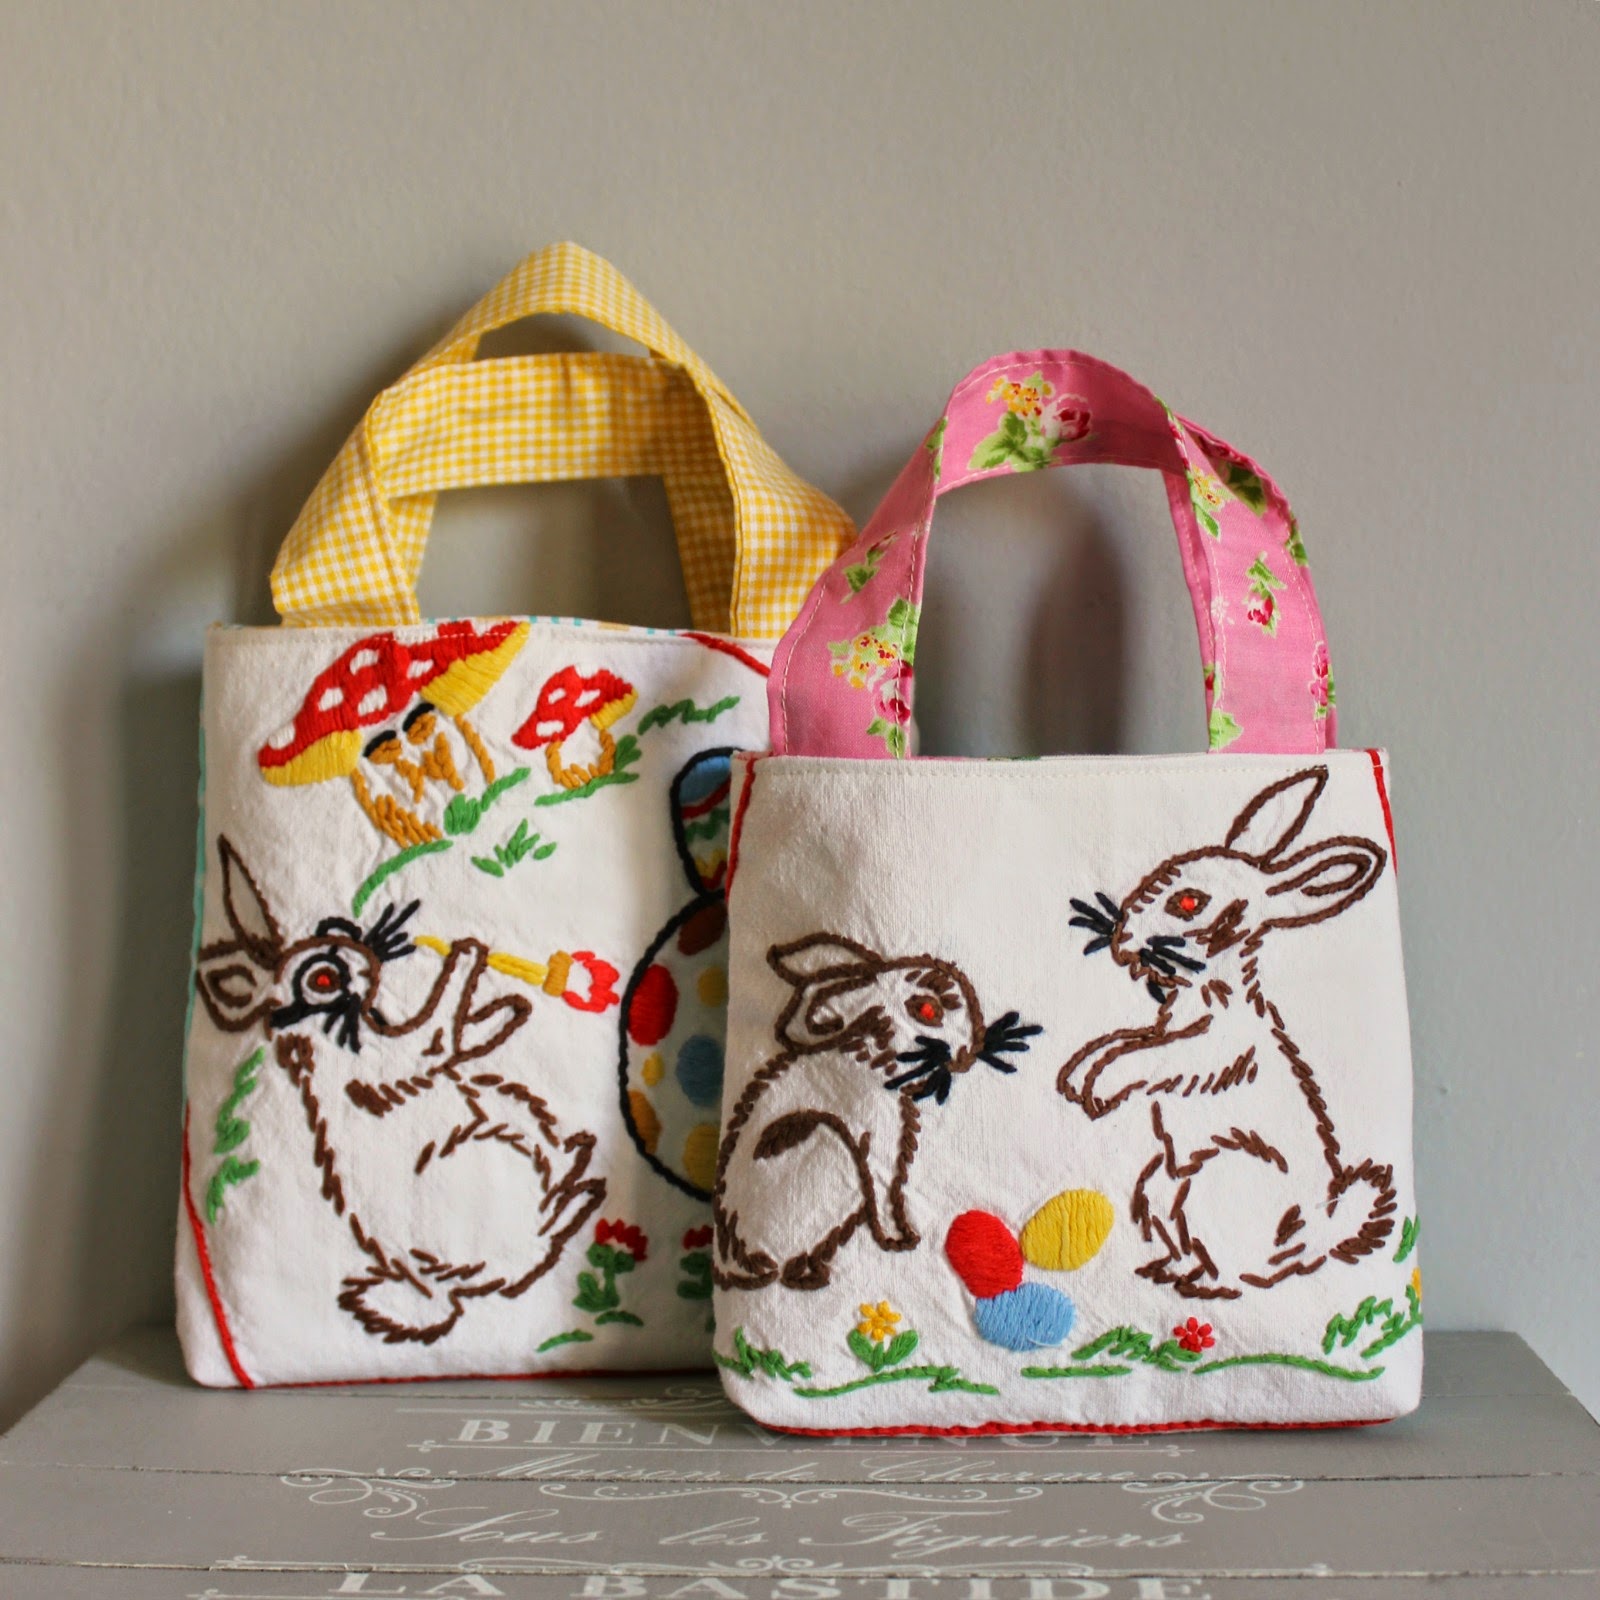 Roxy Creations: Hand embroidered vintage Easter Totes